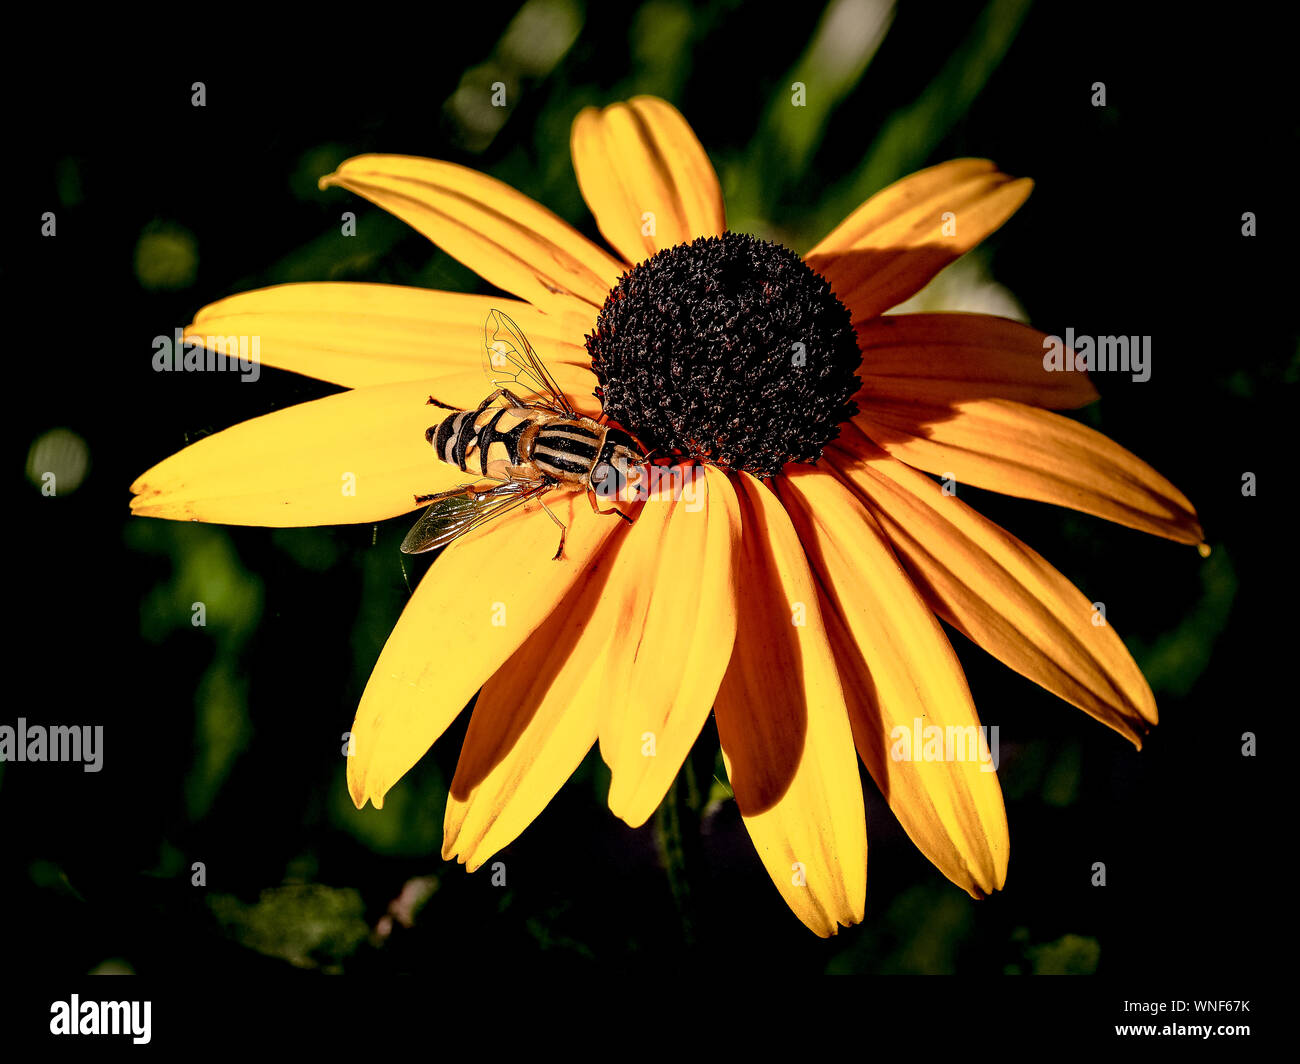 Close-up Of Bee On Black-eyed Yellow Flowers Stock Photo